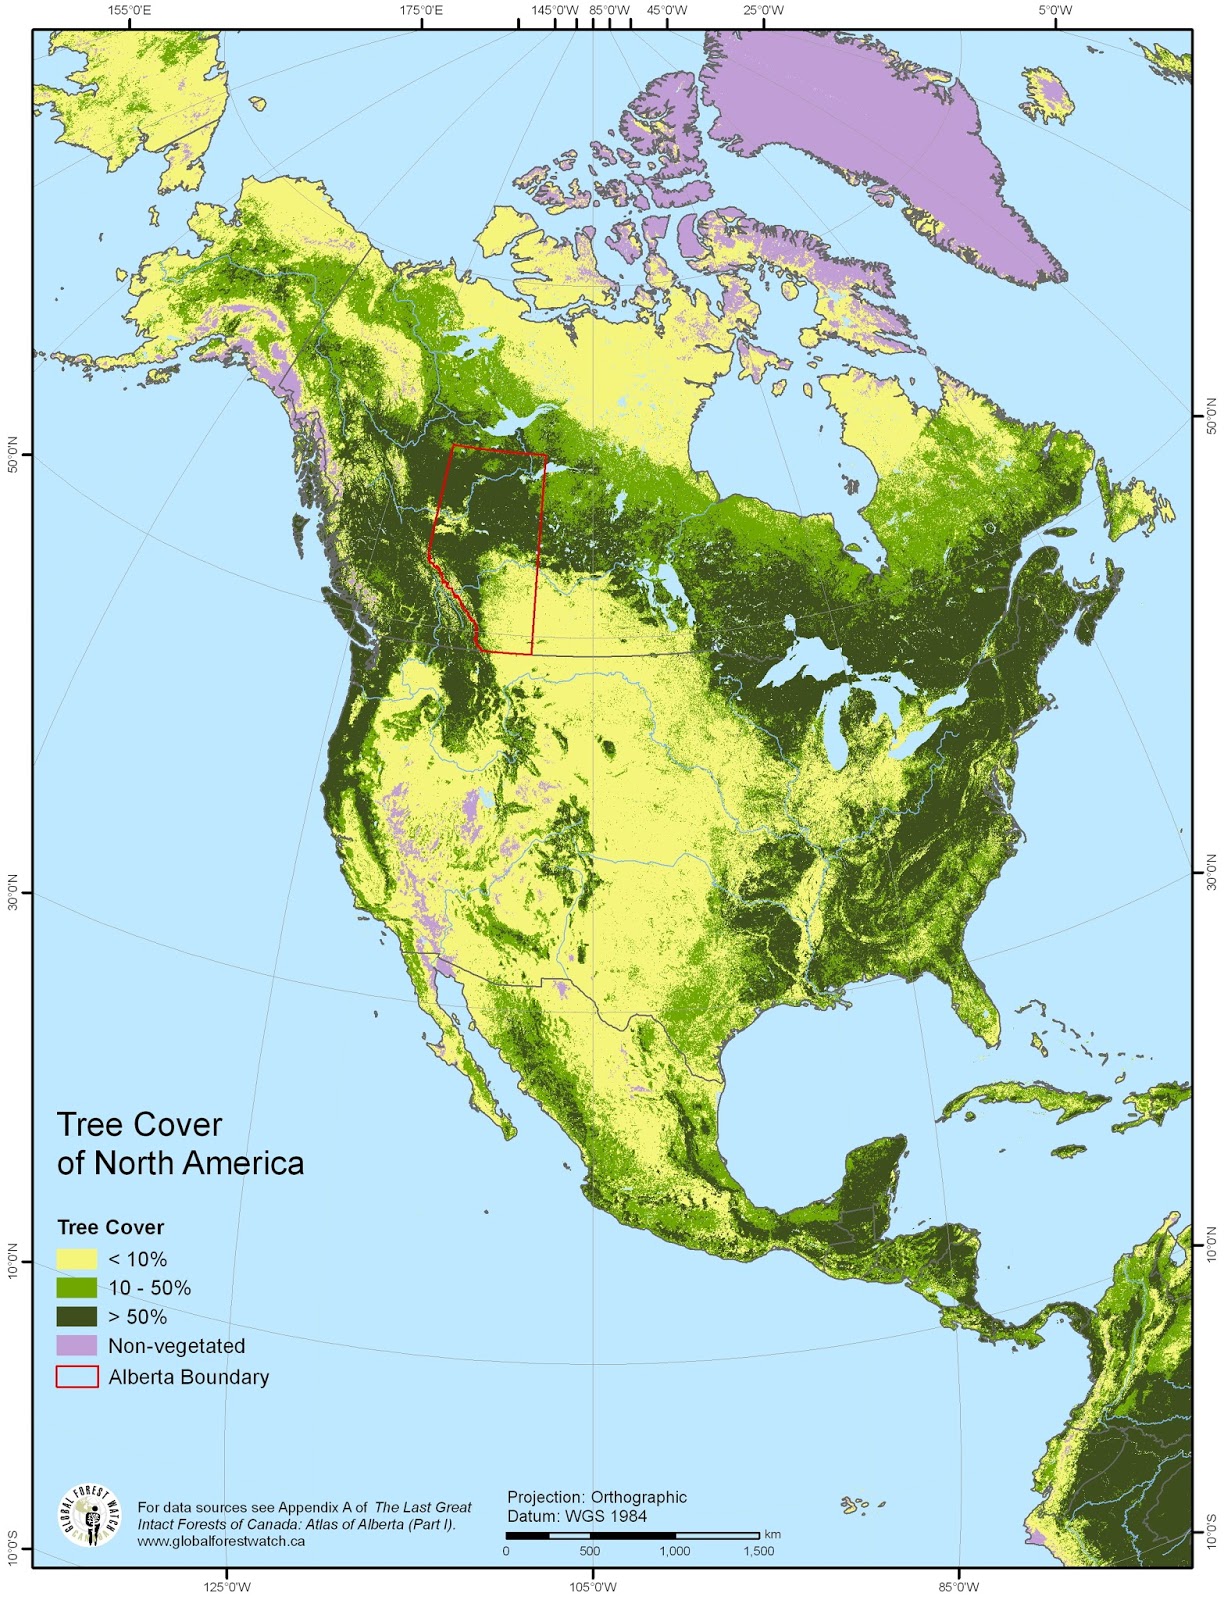 Tree cover of North America